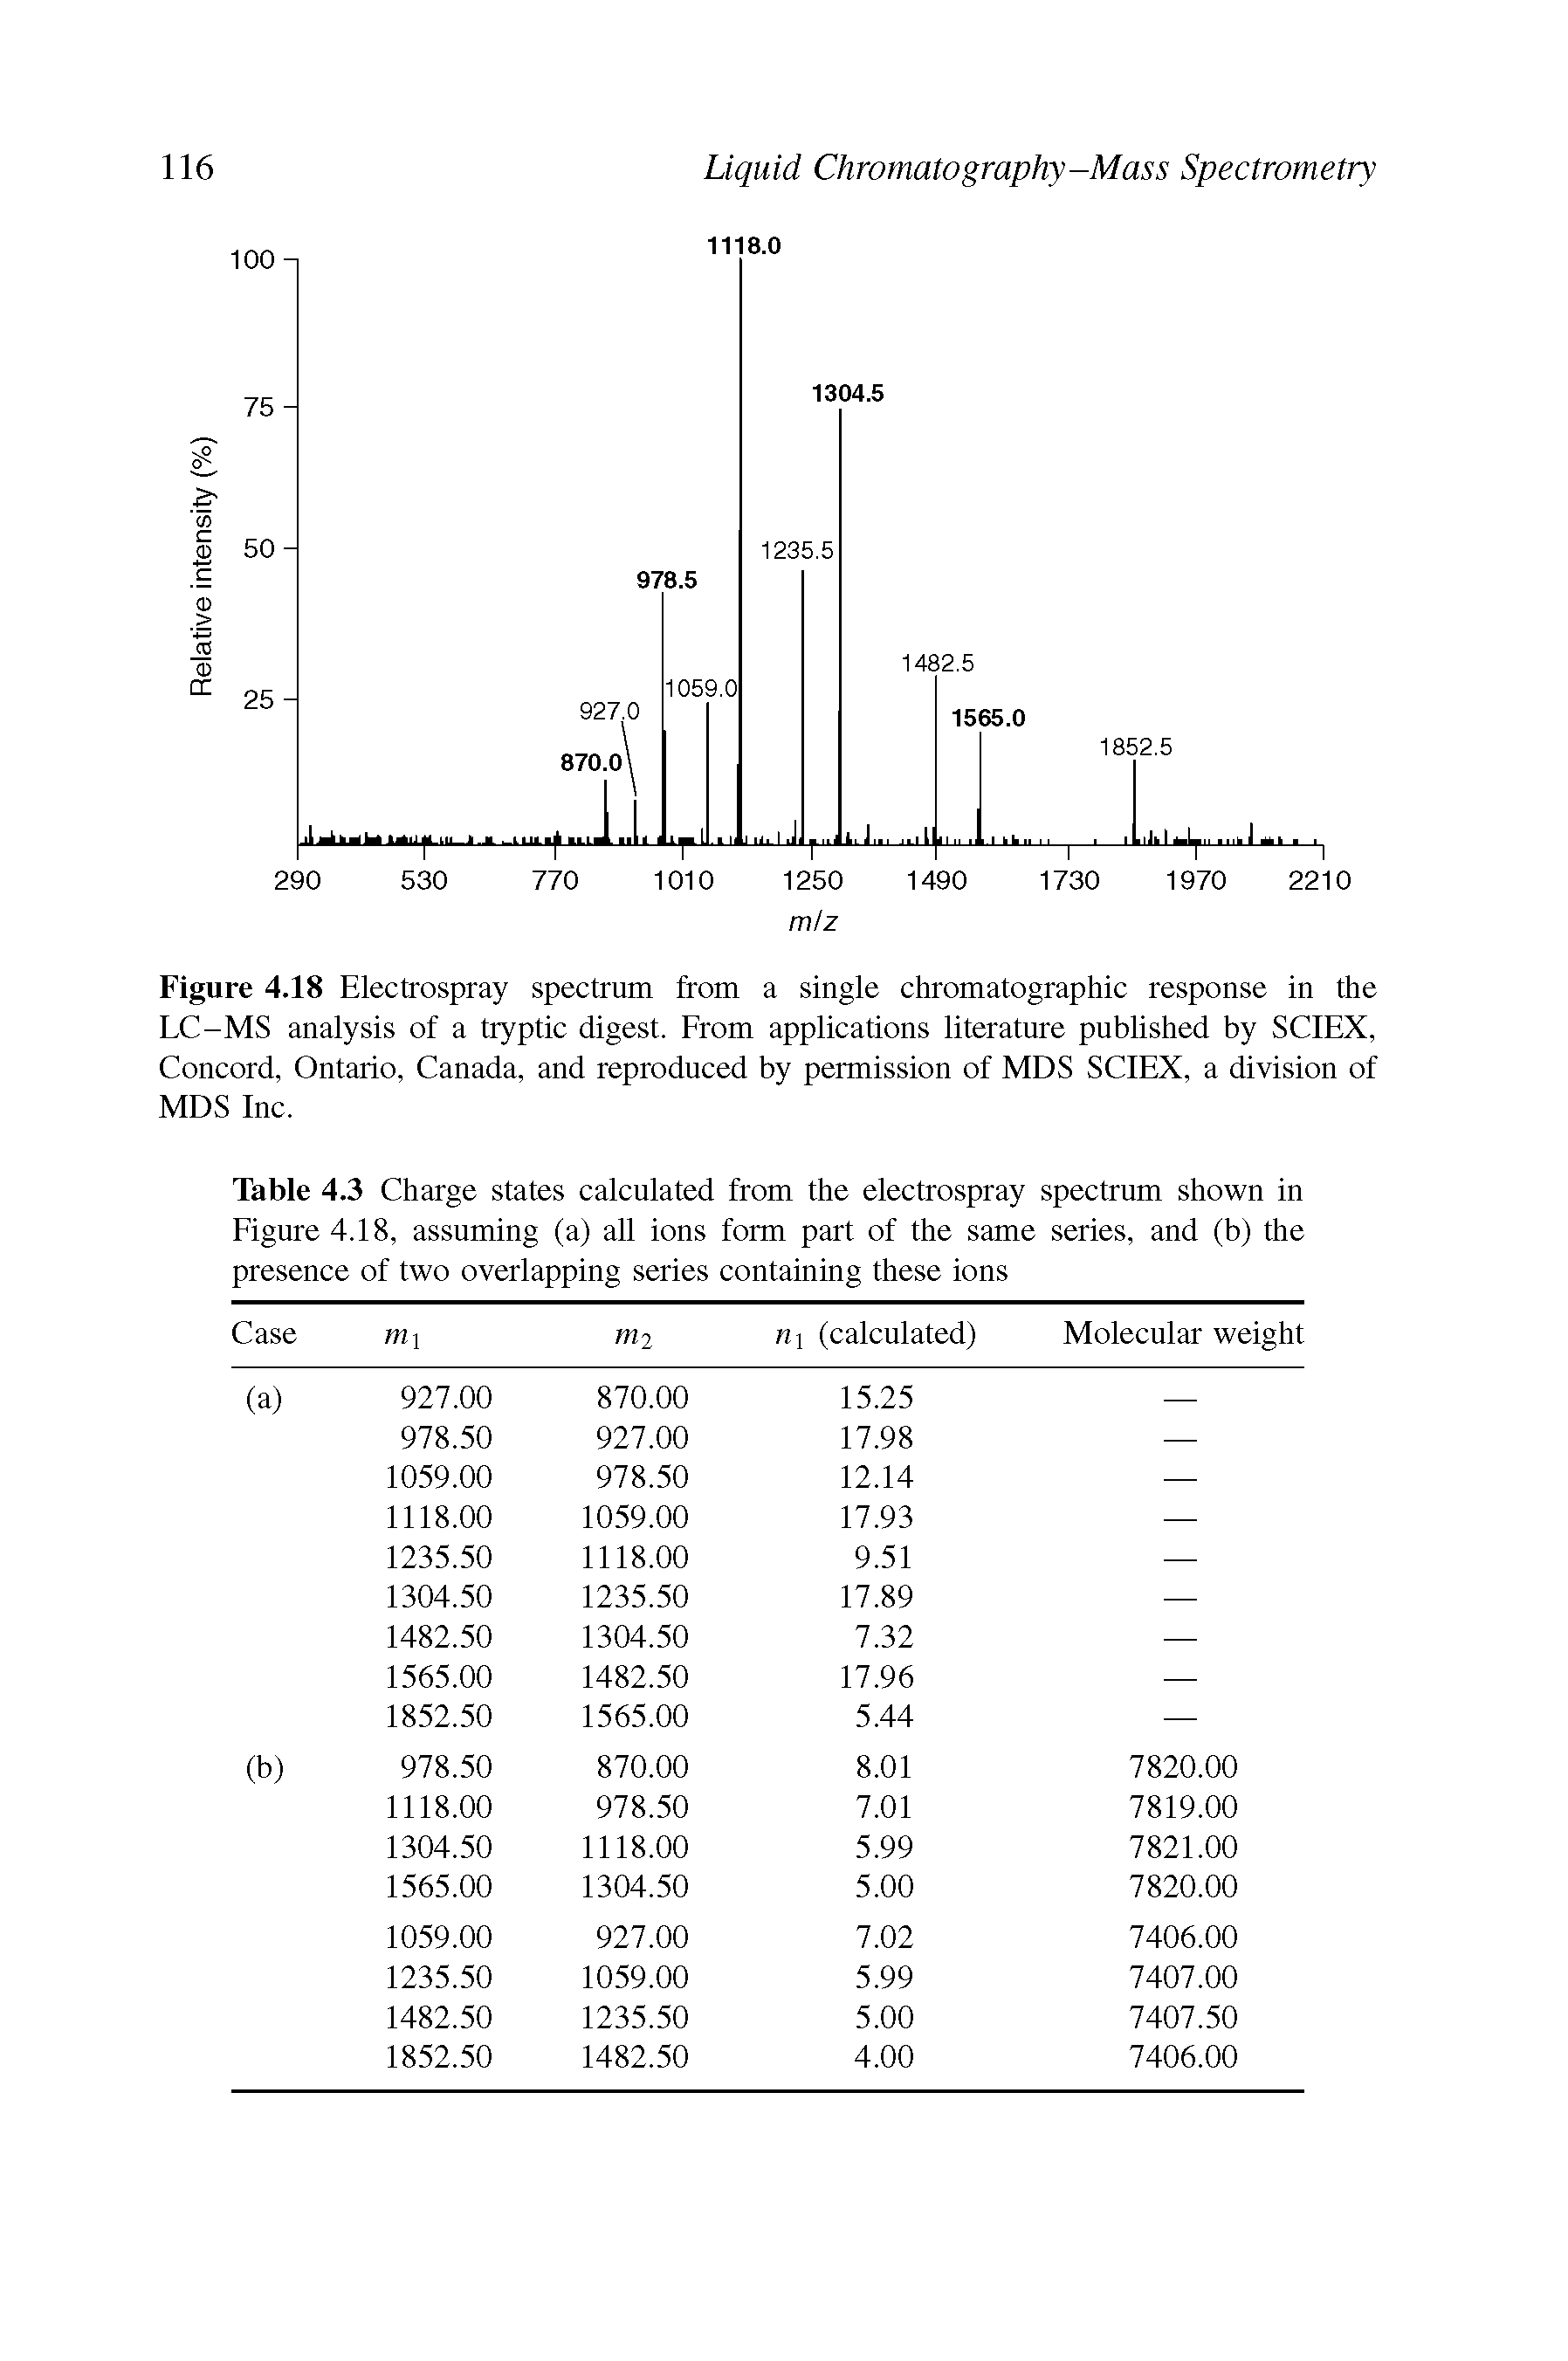 Table 4.3 Charge states calculated from the electrospray spectrum shown in Figure 4.18, assuming (a) all ions form part of the same series, and (b) the presence of two overlapping series containing these ions...